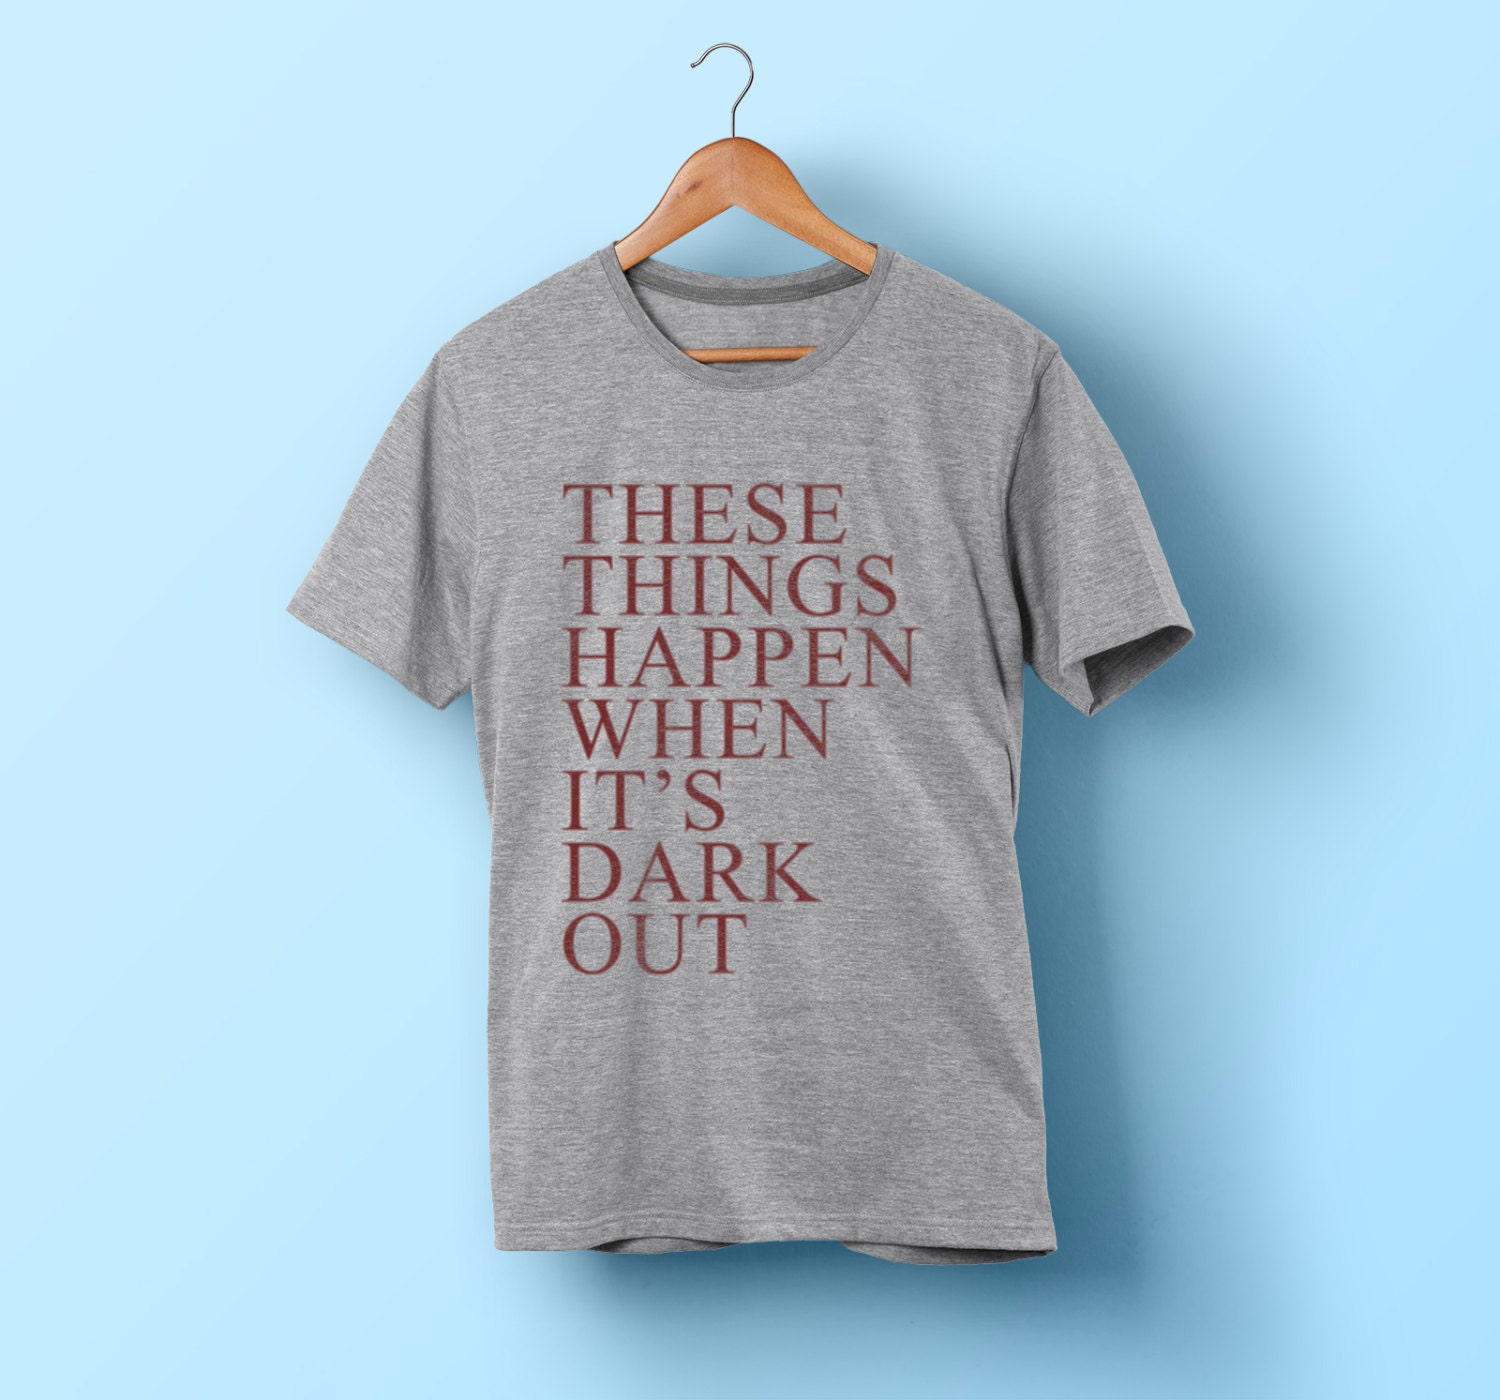 When It's Dark Out G Eazy T Shirt by CapitalLaundry on Etsy1500 x 1400